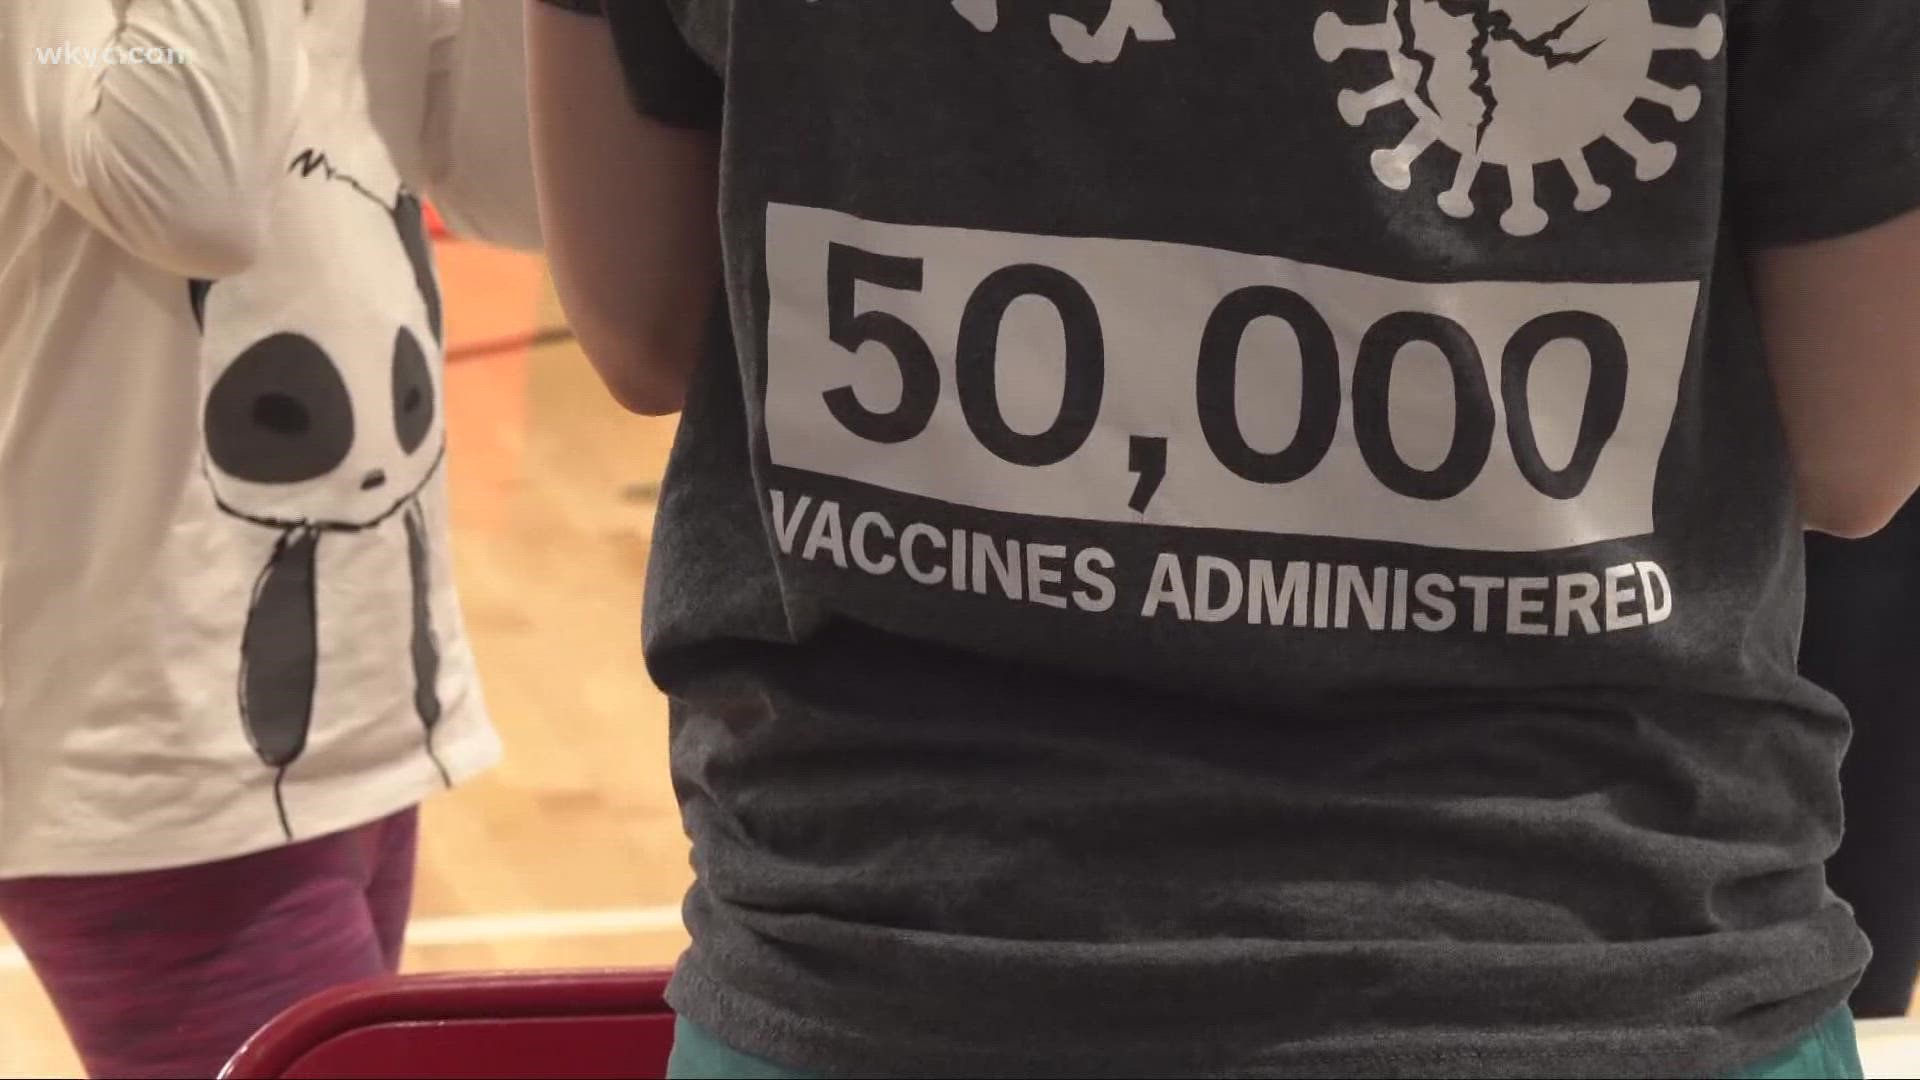 As Governor Mike DeWine continues to urge vaccinations for kids, some parents are frustrated with district masking requirements. Brandon Simmons reports.